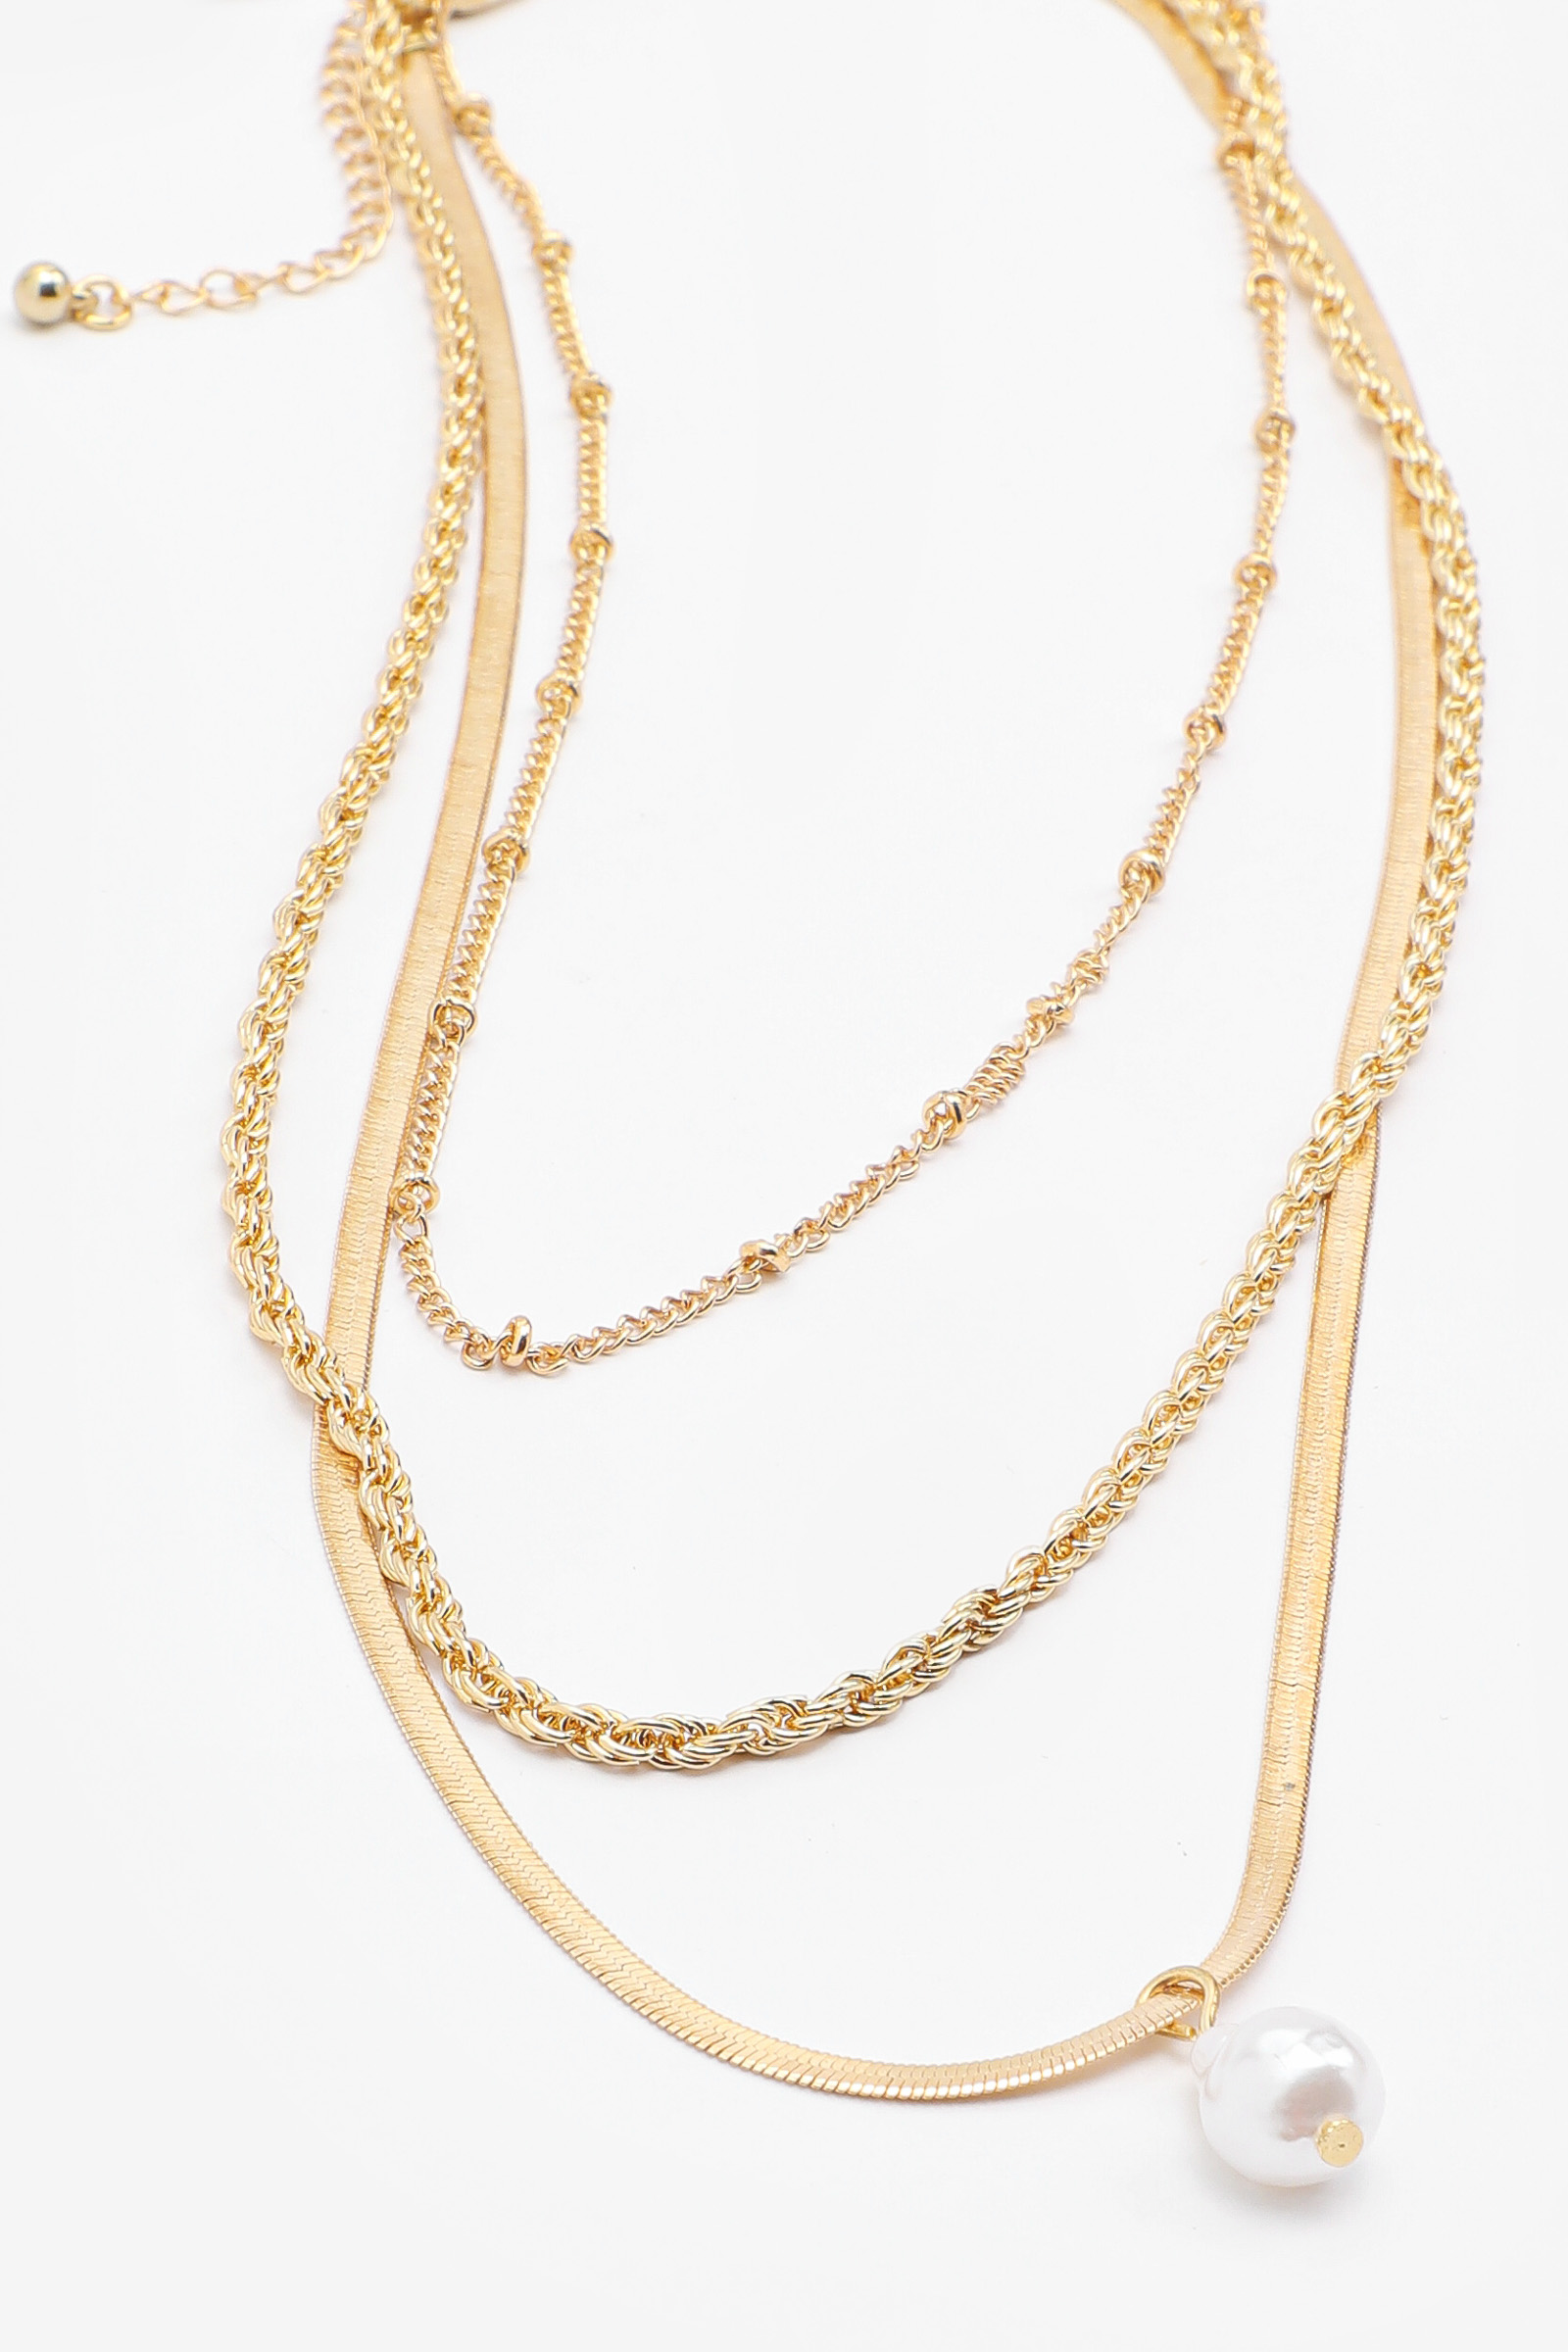 Gold-Tone Layered Necklace with Pearl Pendant